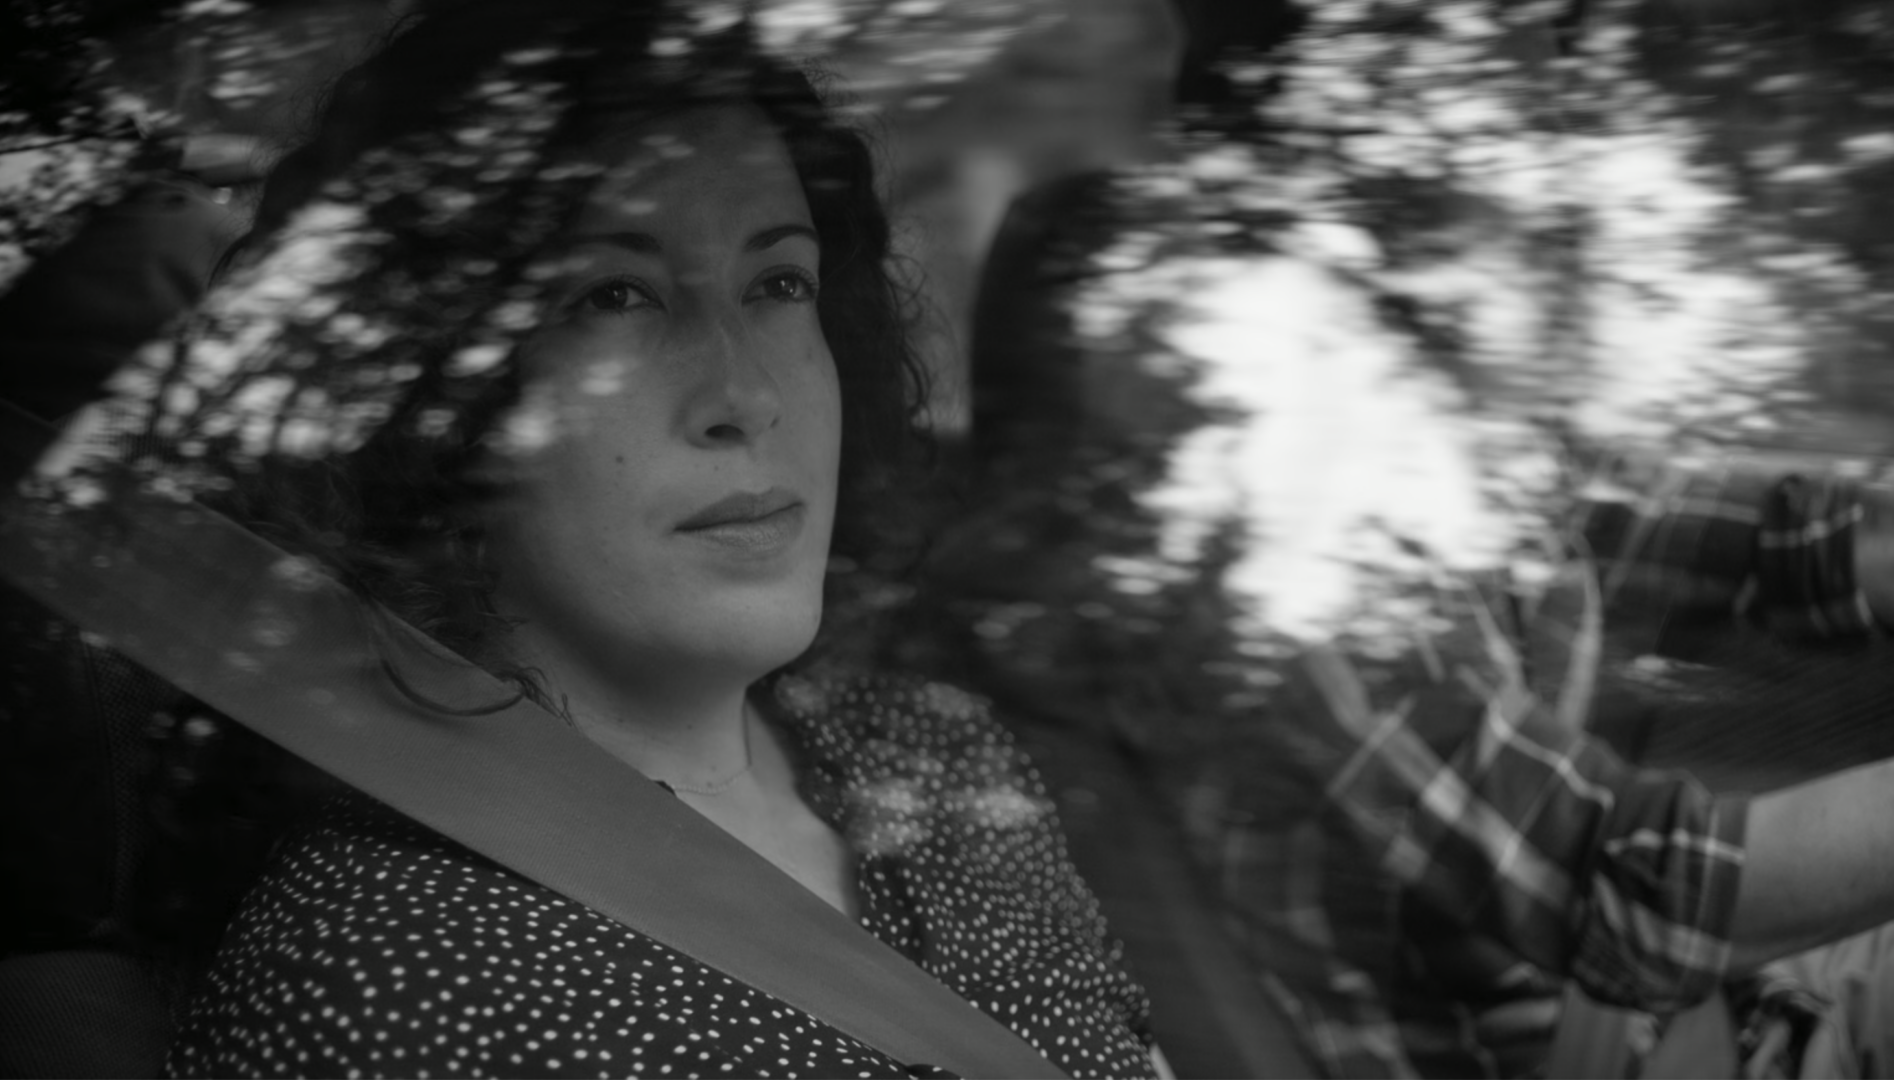 A black and white photo of a woman looking out a car window. The reflection of trees is overlaid on the window.